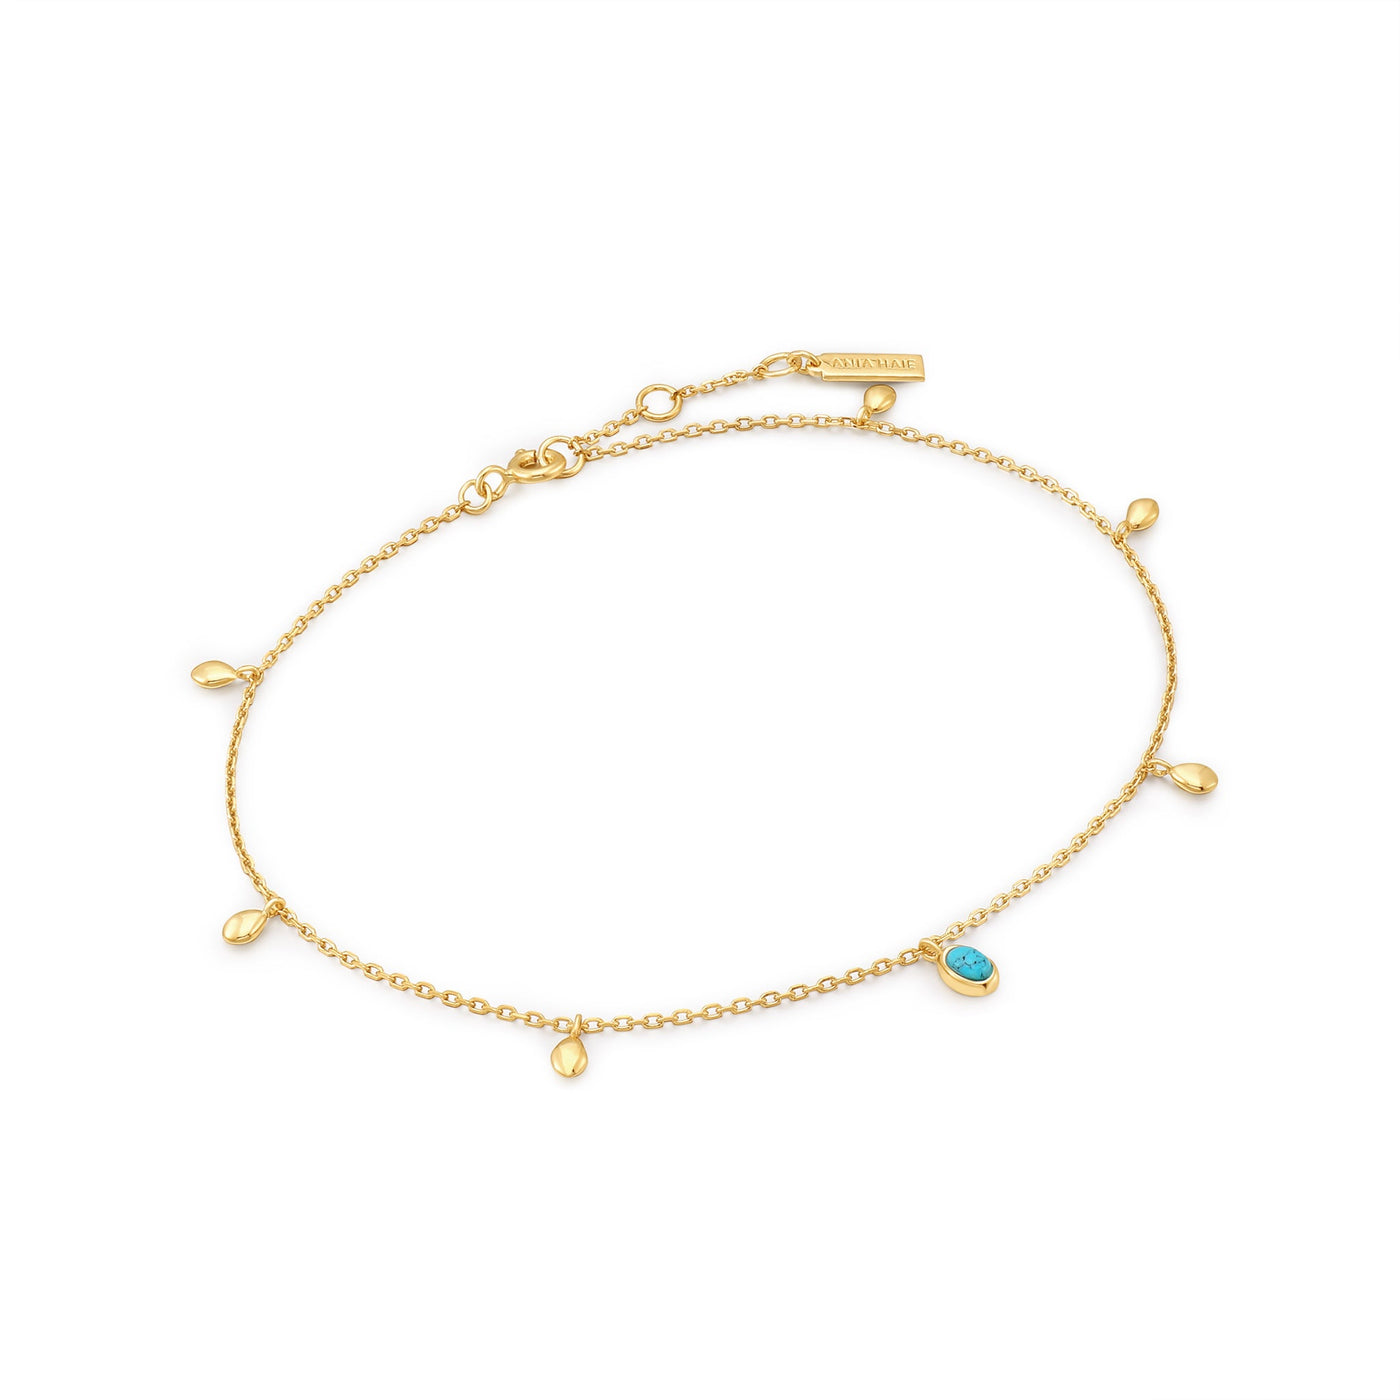 Ania Haie YGP GOLD TURQ. DROP PENDANT ANKLET F044-01G